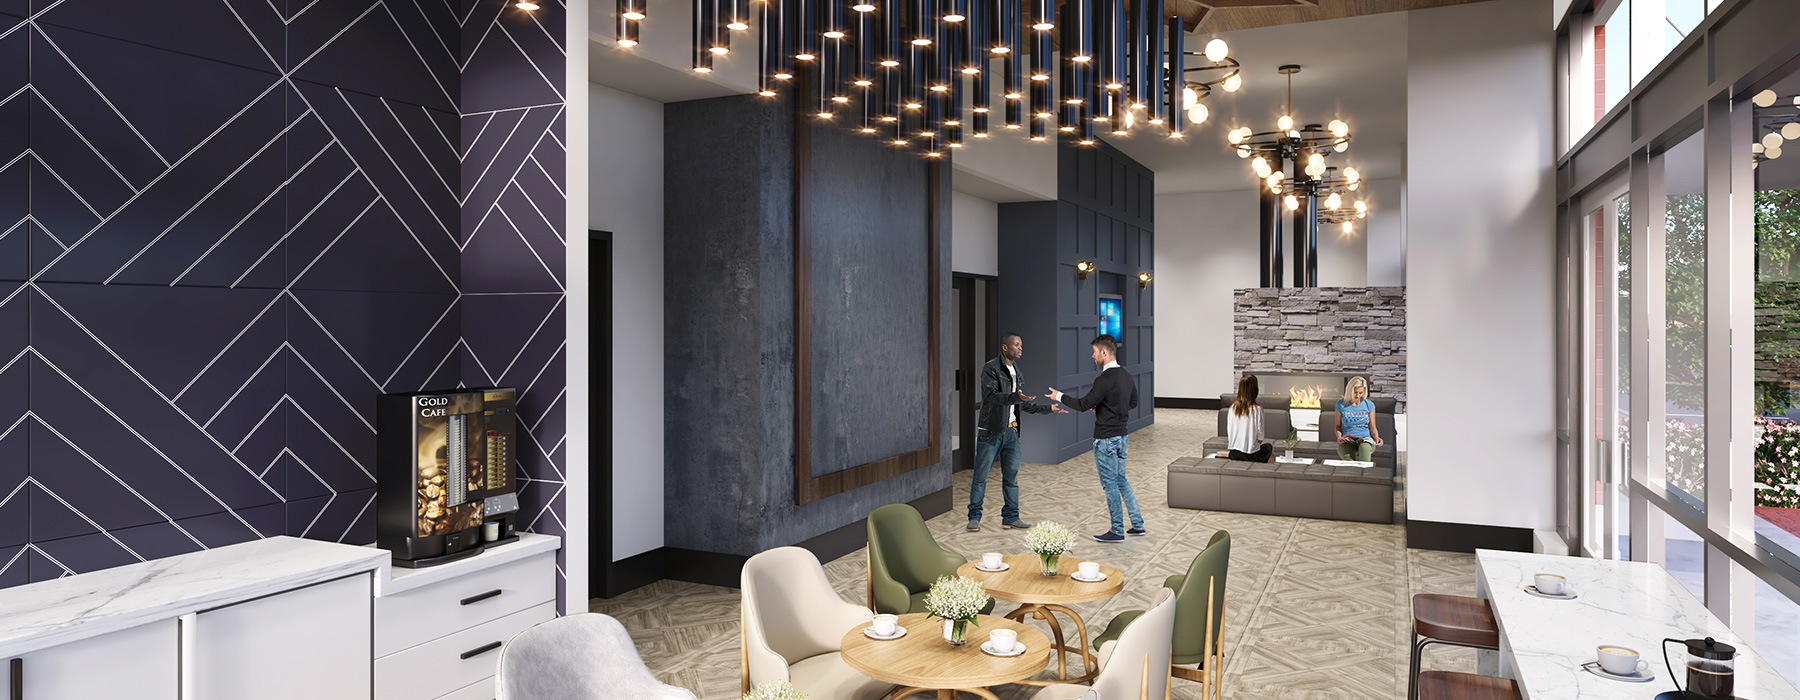 rendering of open lobby with high ceilings and modern decor